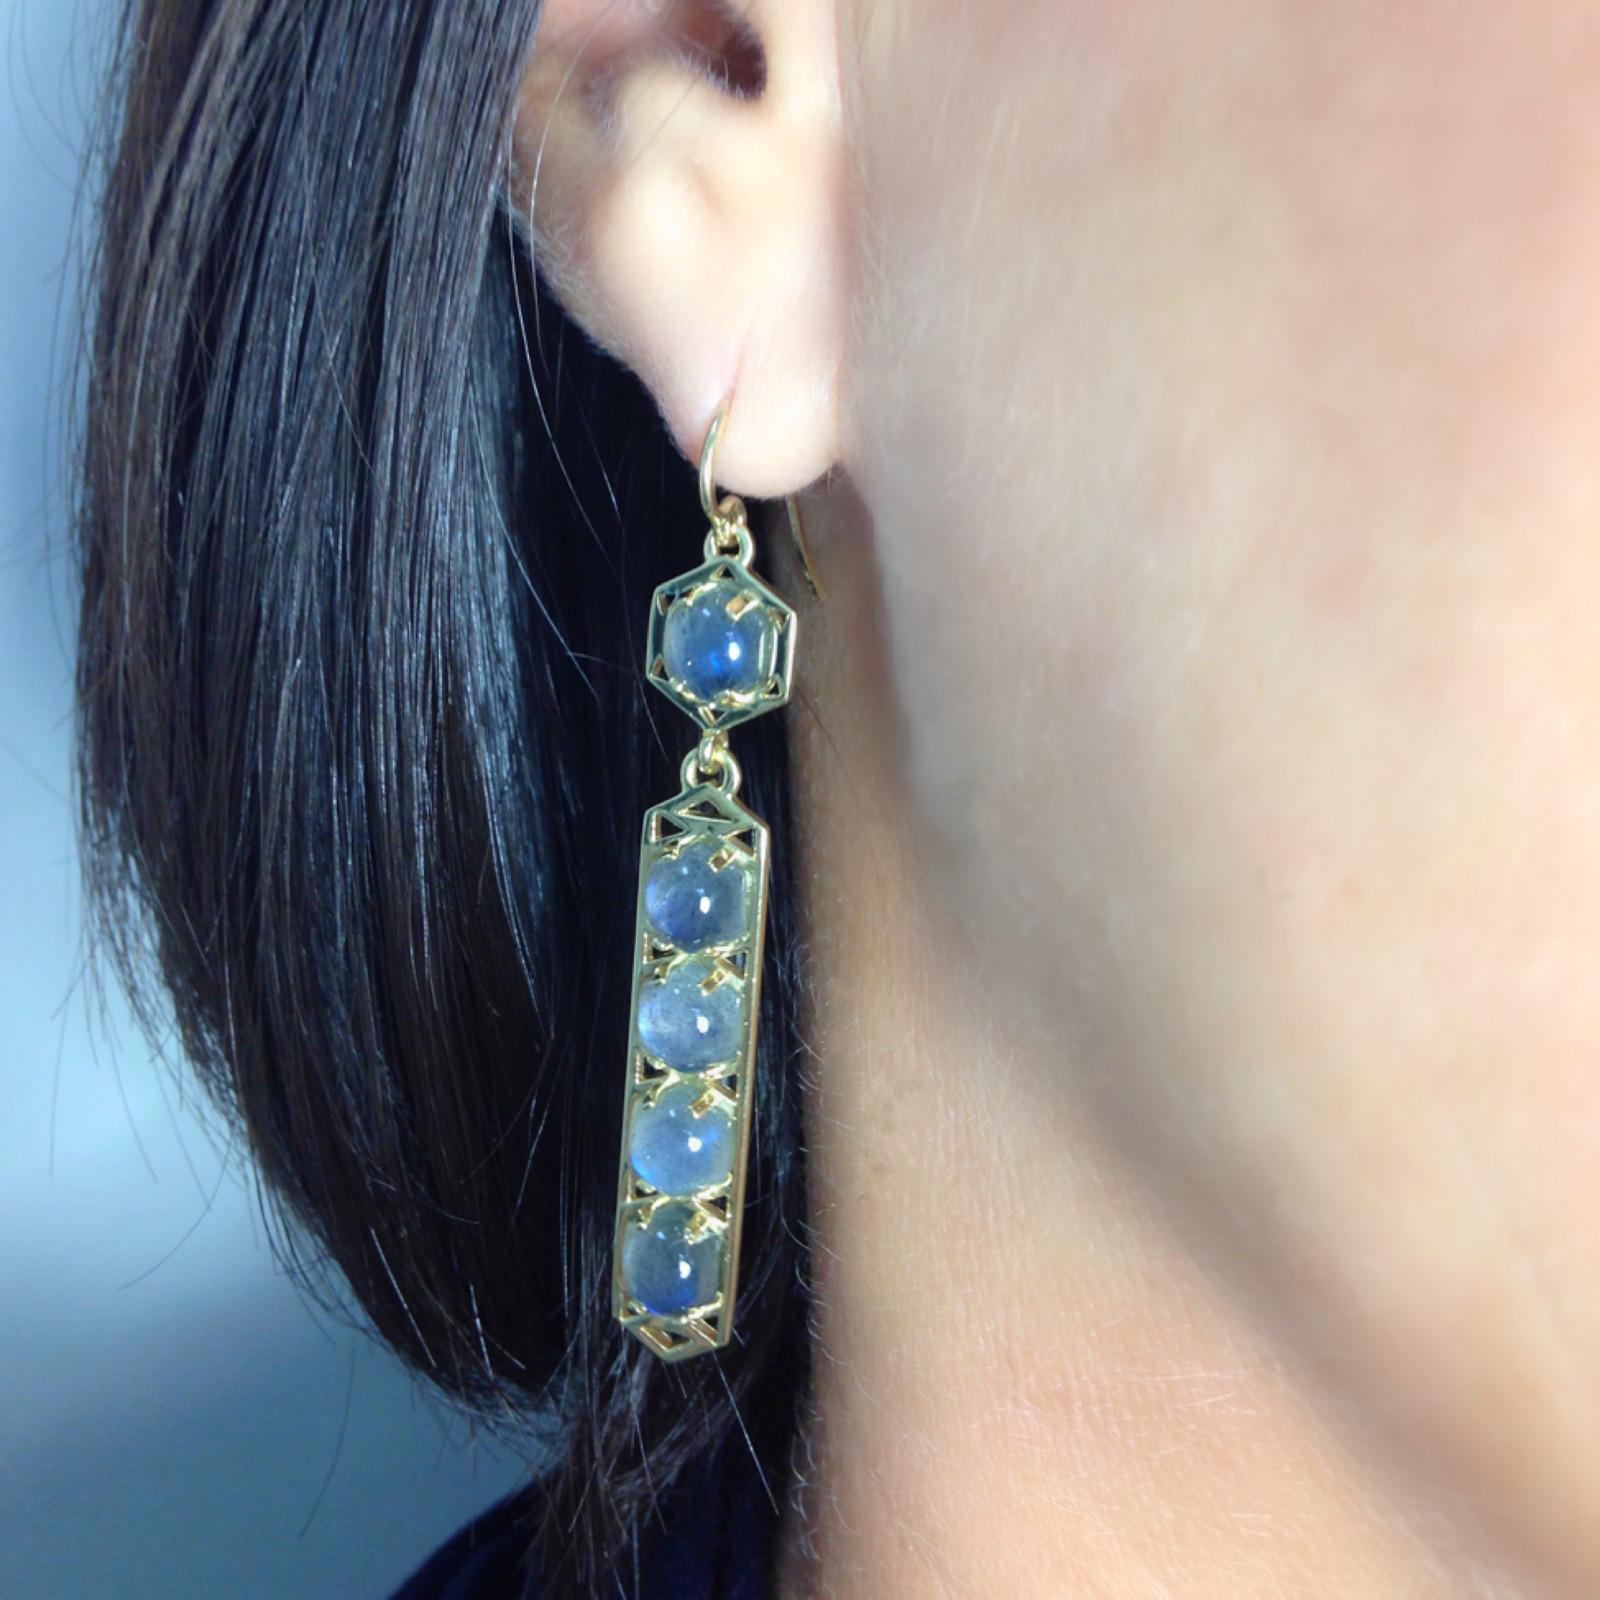 With modern geometry based on classical architectural forms, these 18 karat earrings feature custom cut 6mm hexagon Labradorites set in 18 Karat gold.  They feature a striking combination of luminous color against a bold geometric frame.
Materials: 